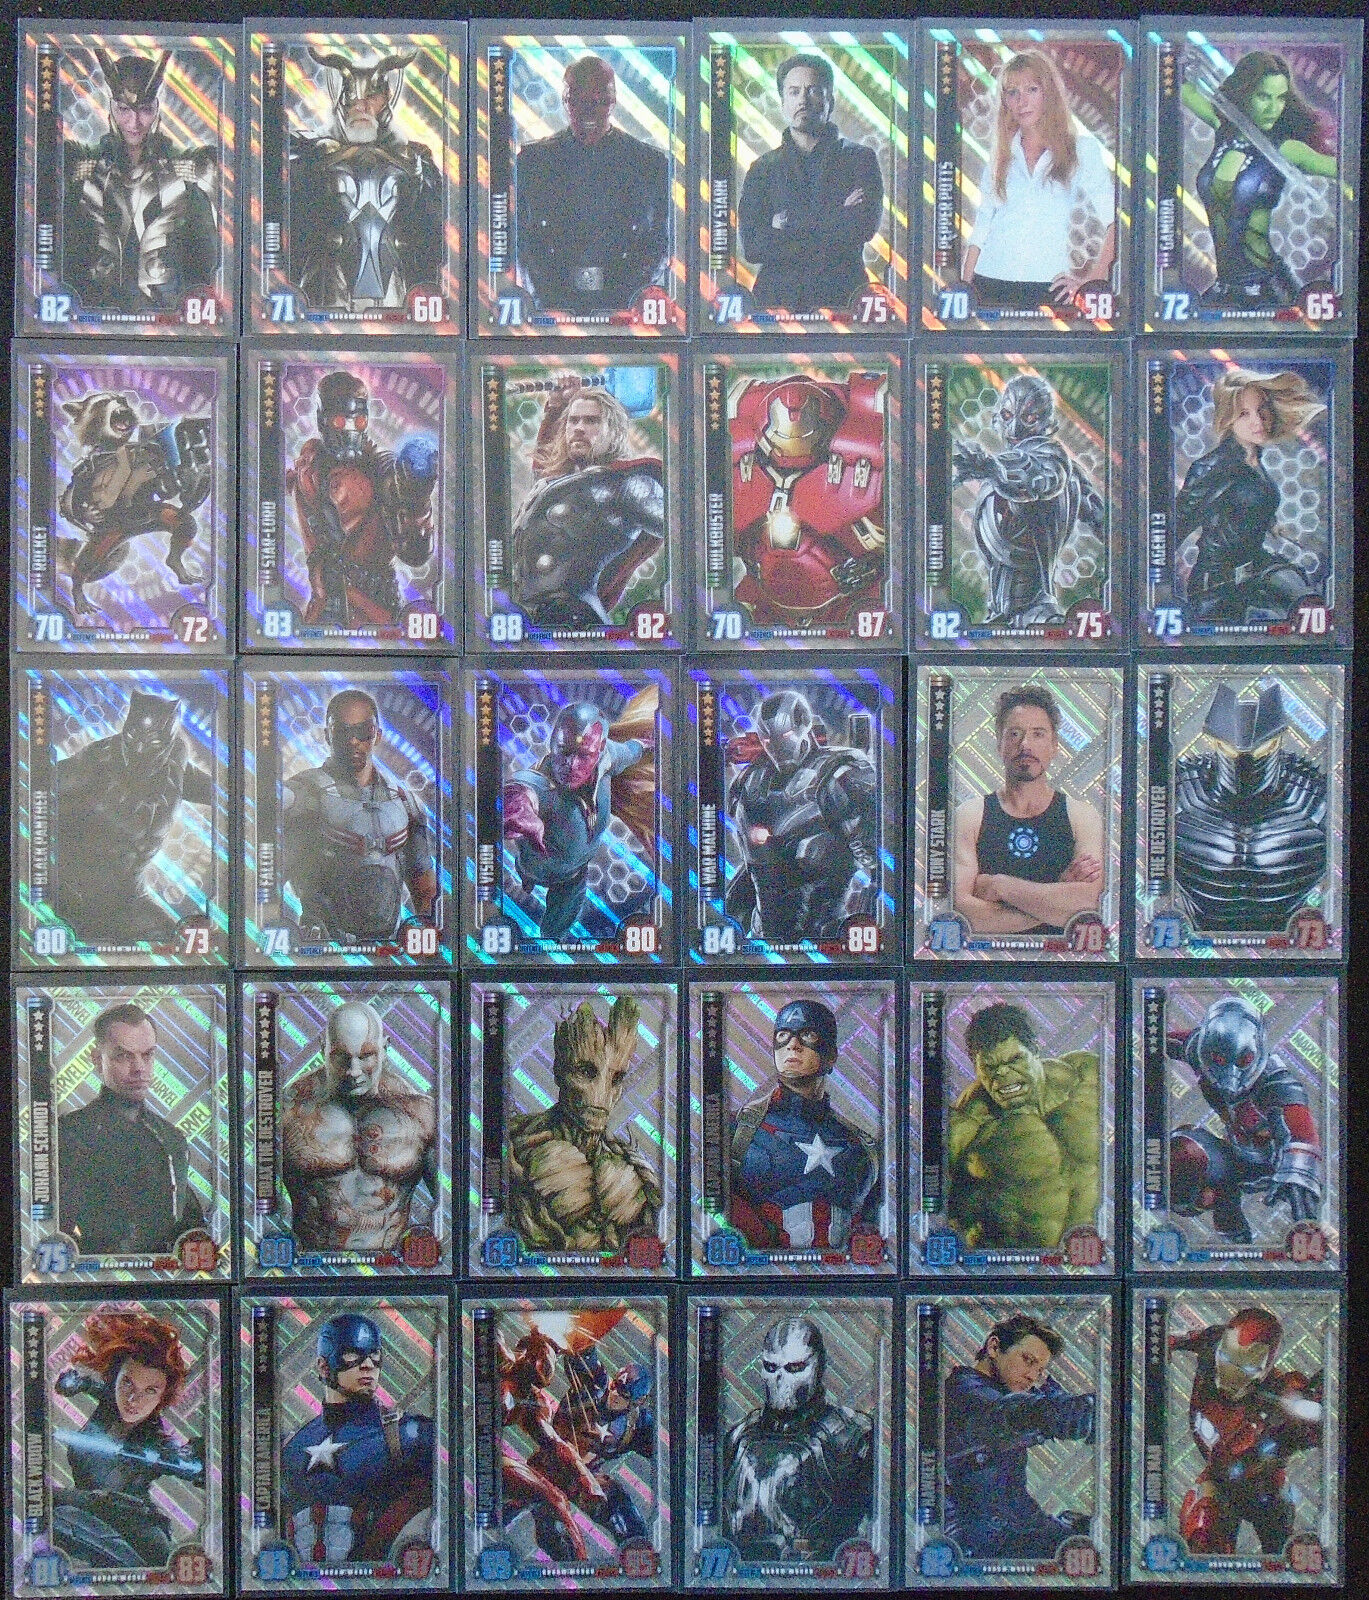 Hero Attax Marvel Cinematic Universe Choose One Foil Card from List